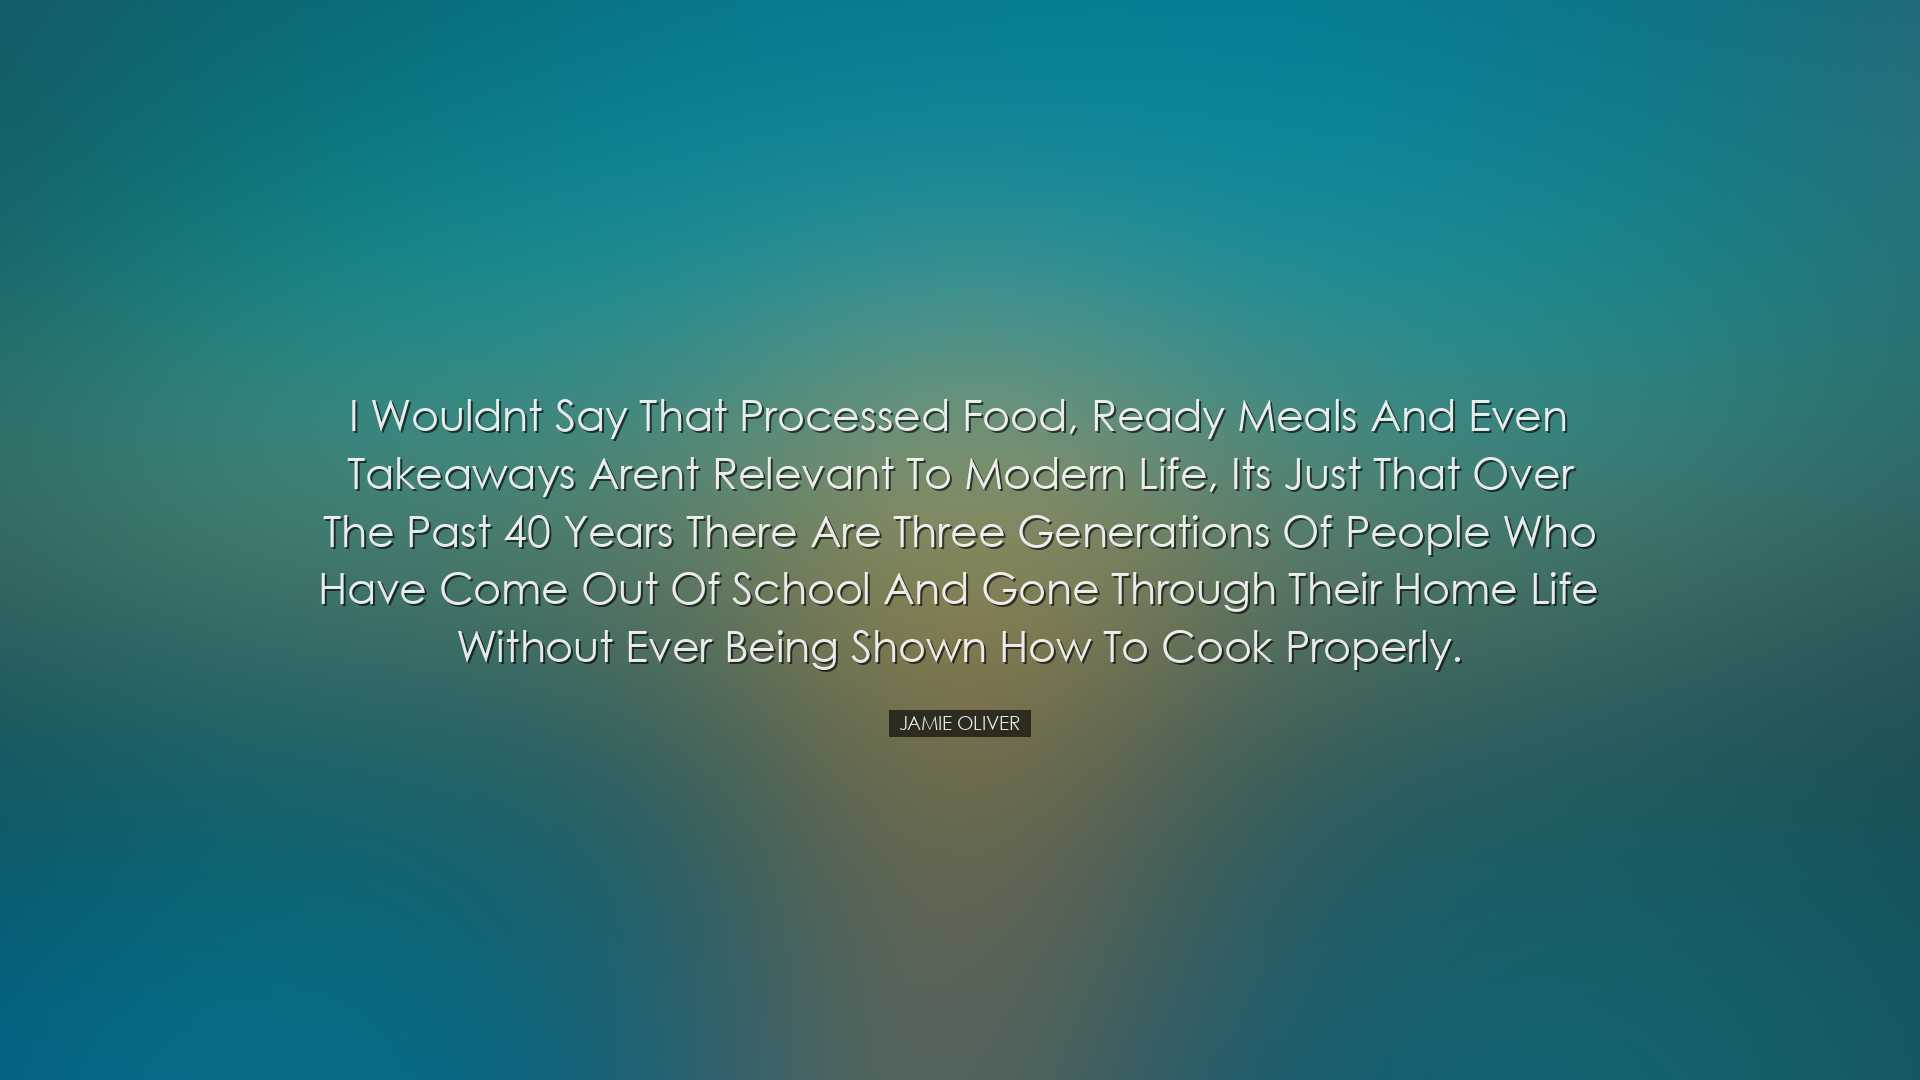 I wouldnt say that processed food, ready meals and even takeaways